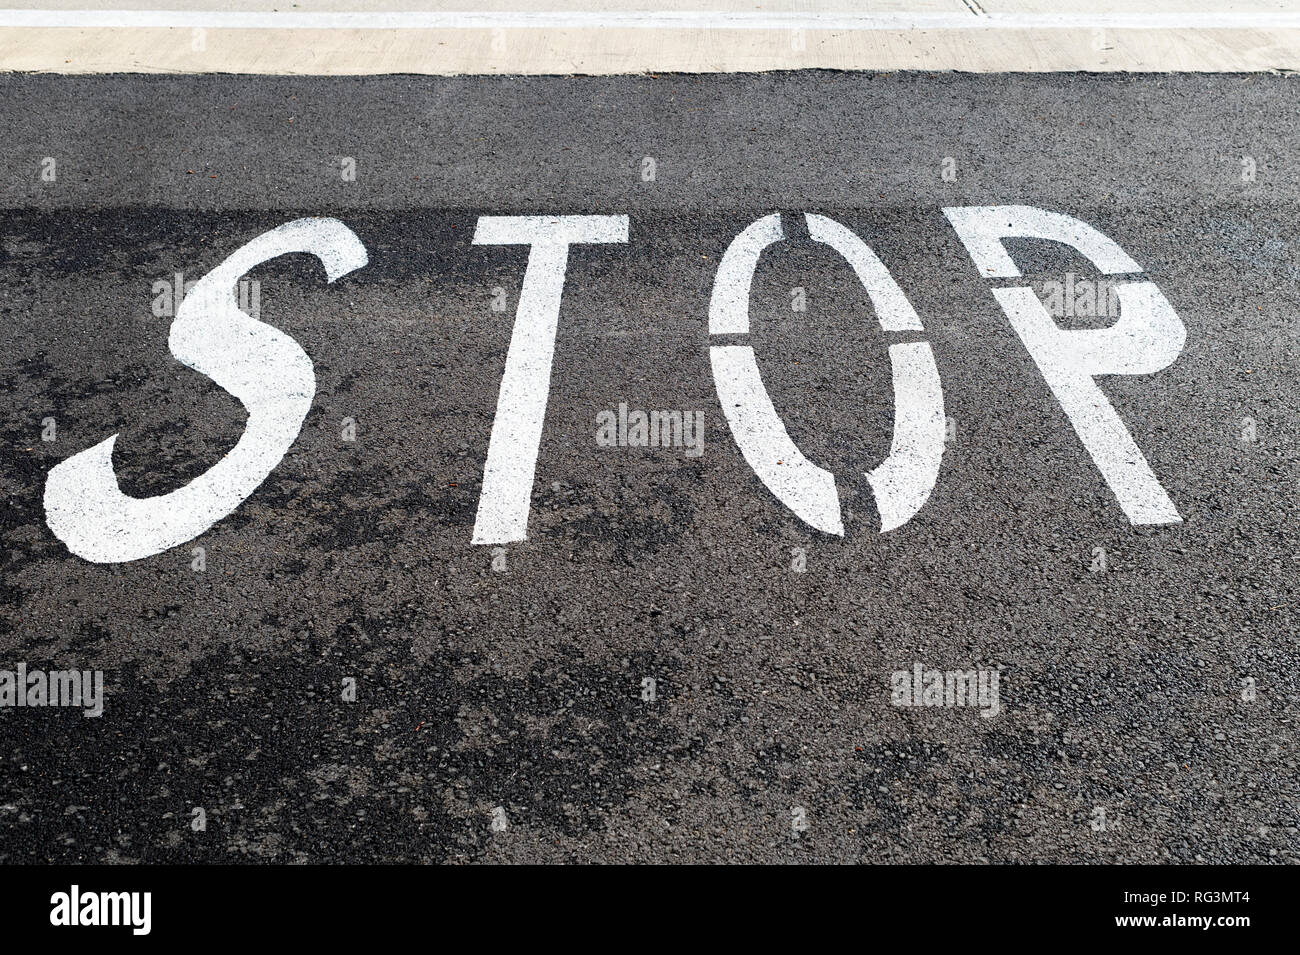 stop, painted on a black tarmac road. Stock Photo